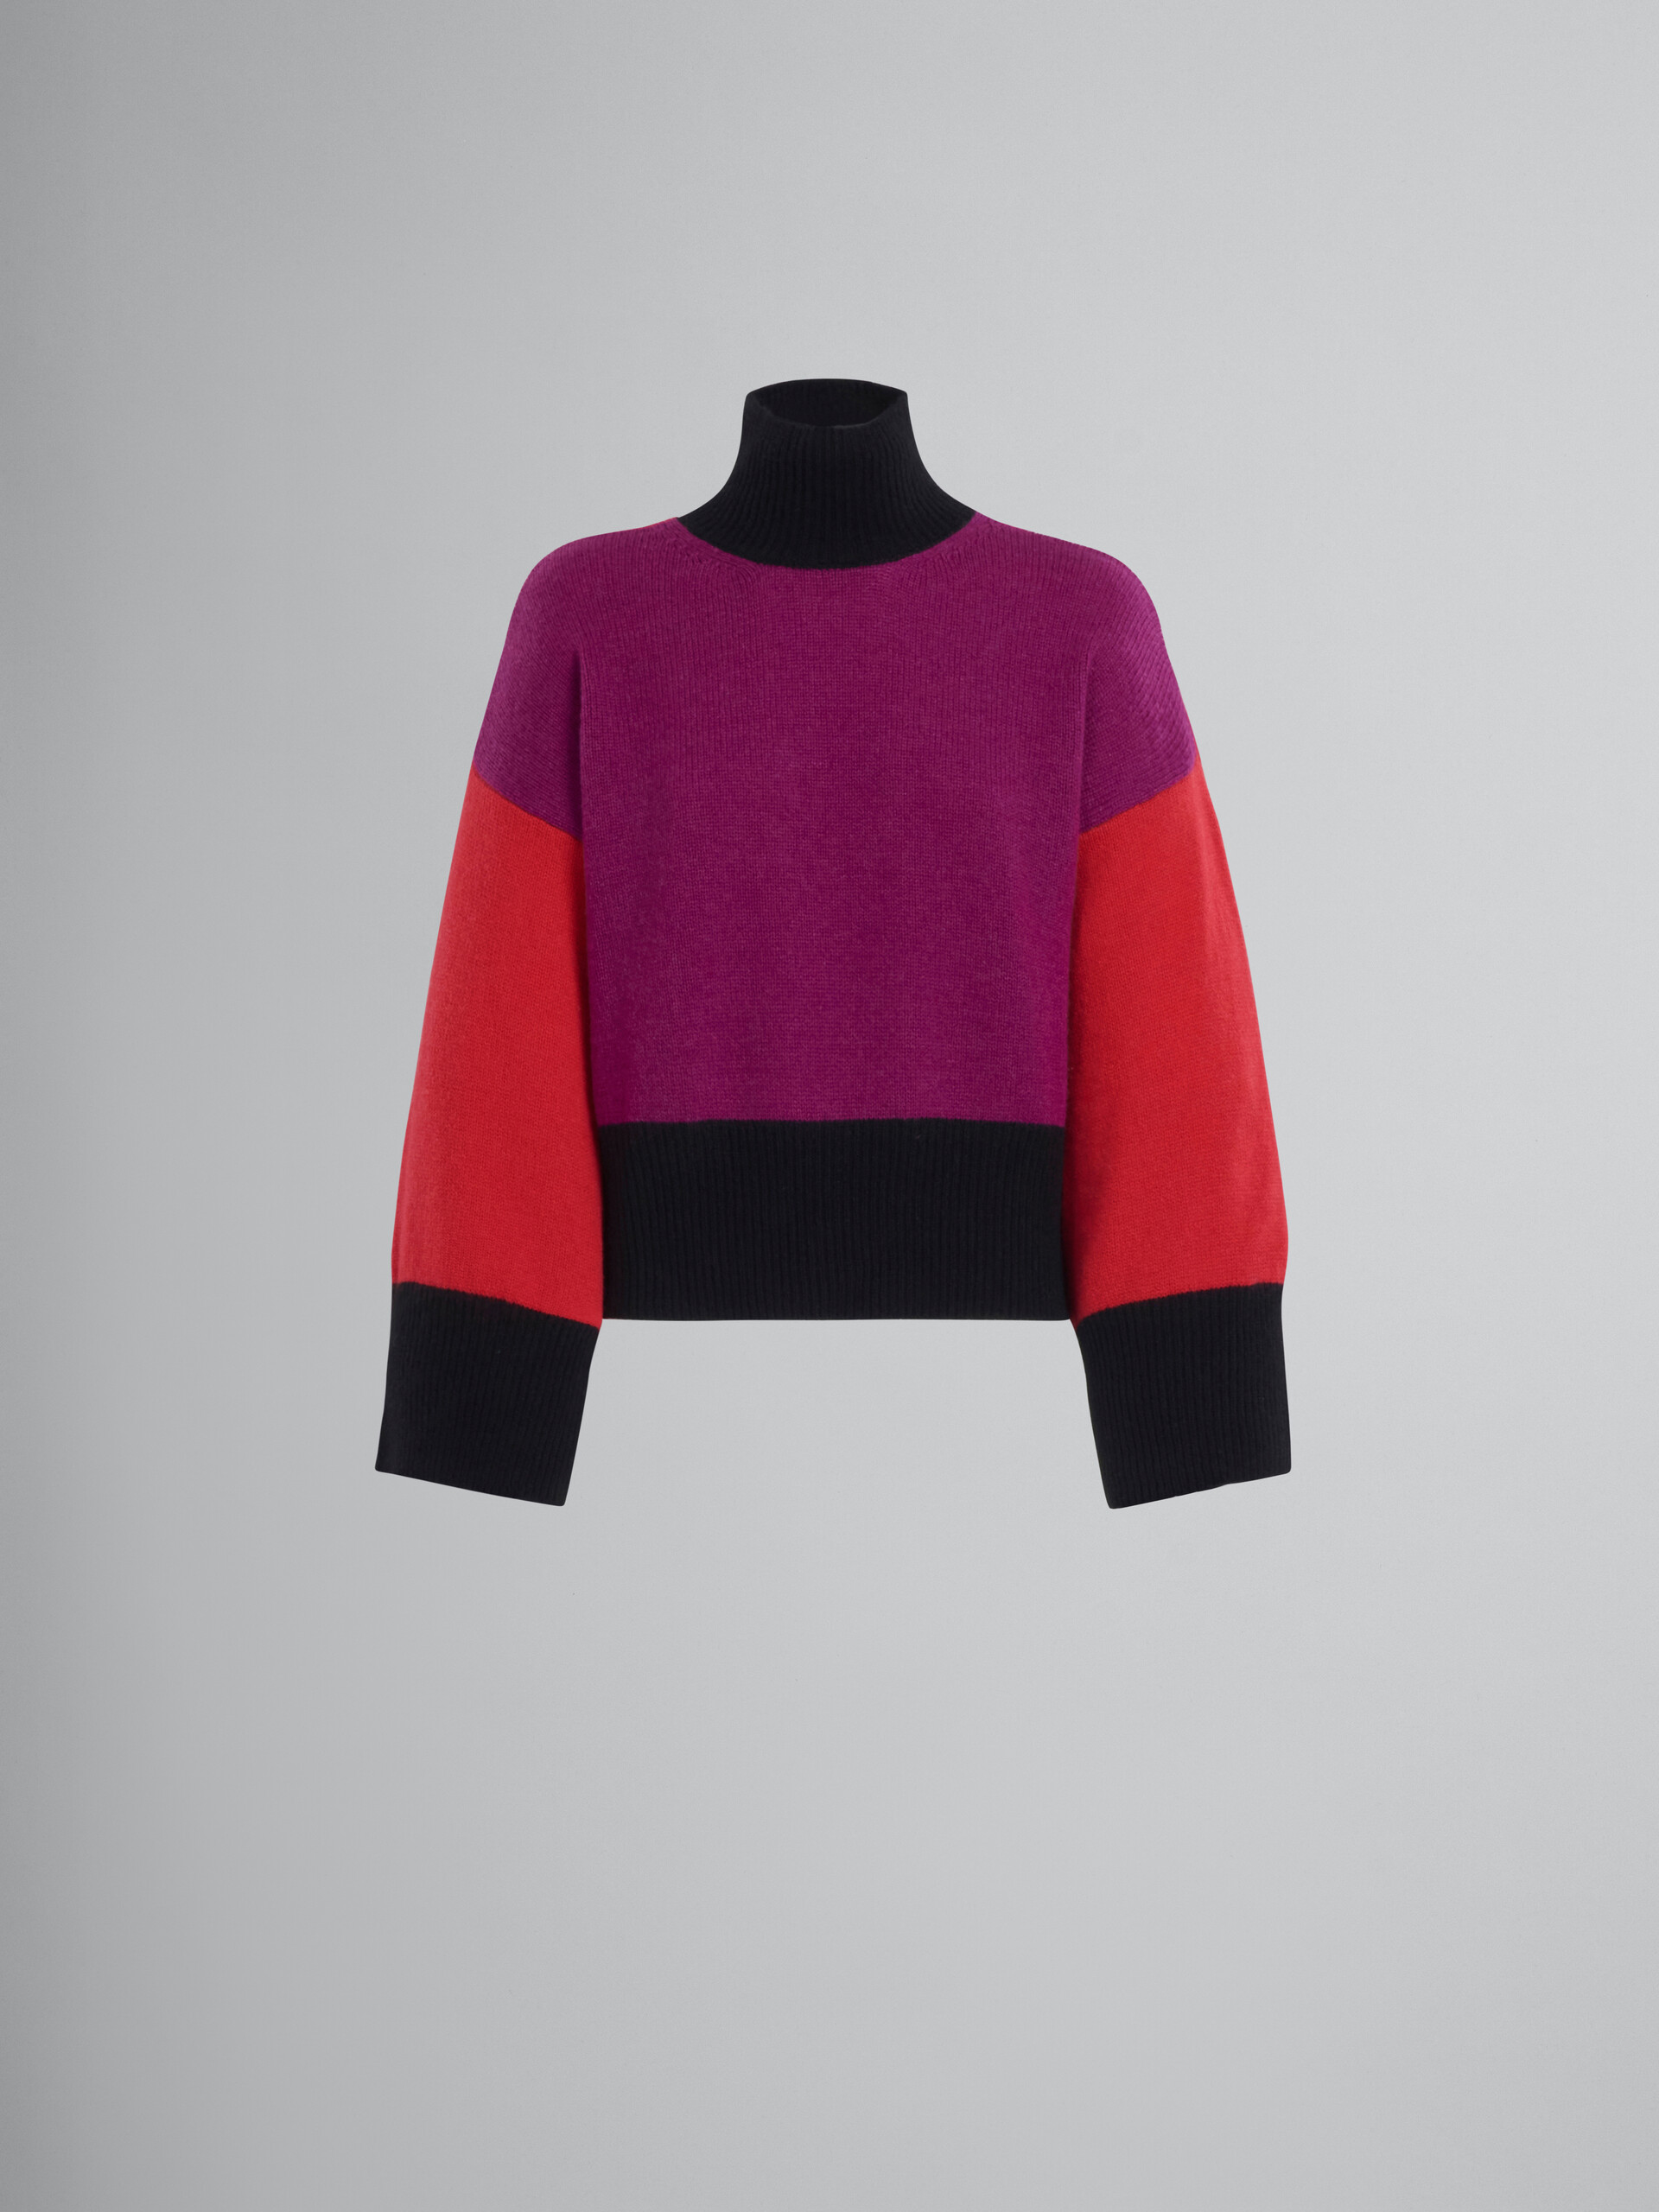 Cashmere cropped T-neck sweater - Pullovers - Image 1